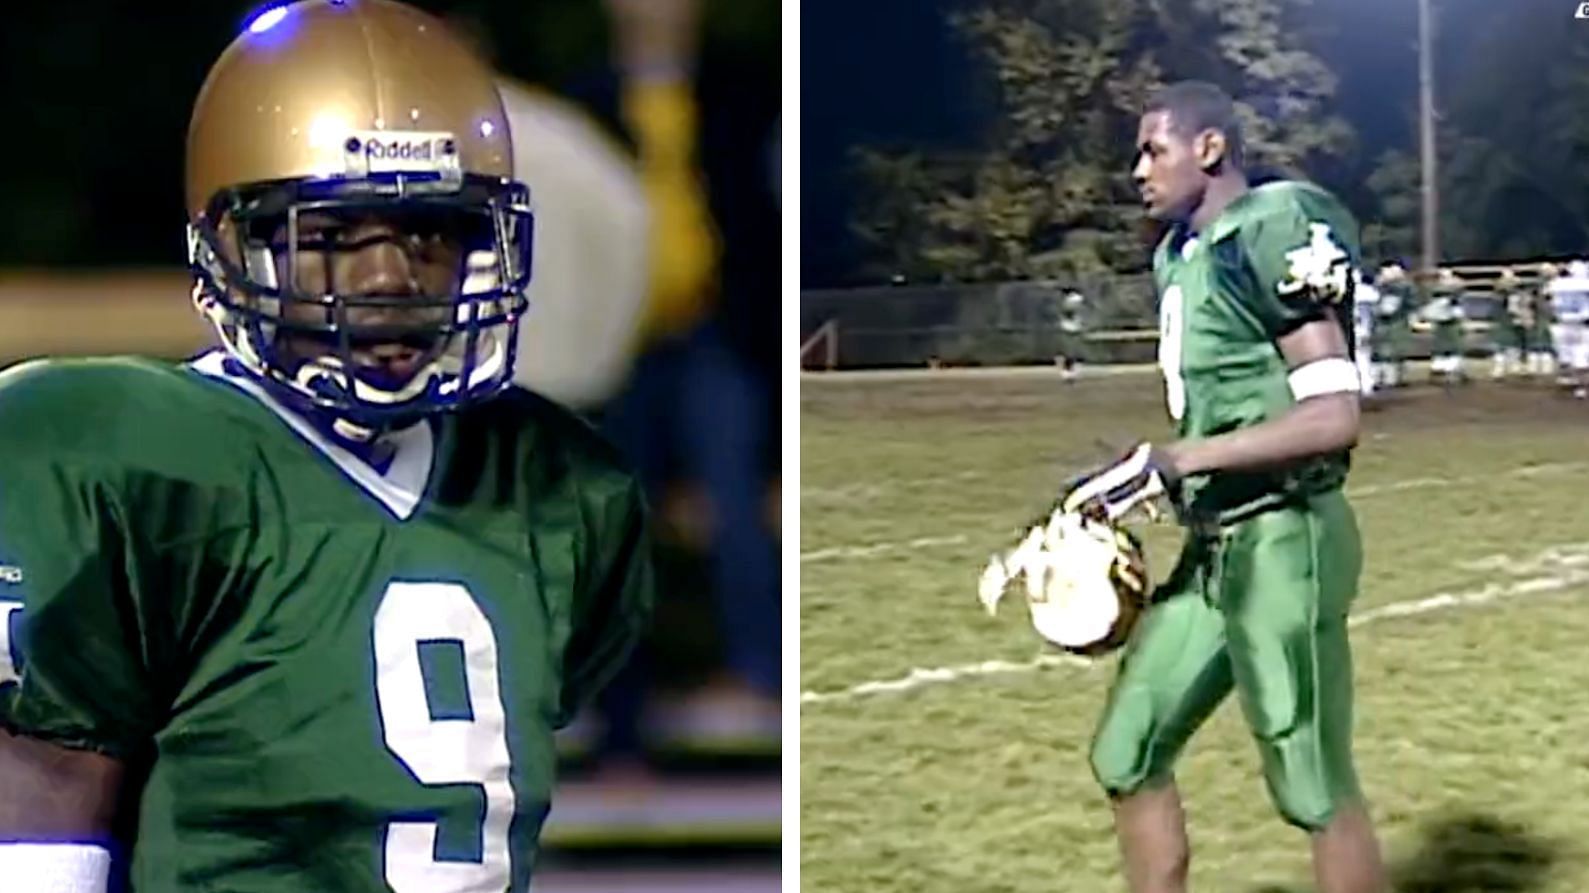 Clip Of LeBron James Playing Football In High School And Catching